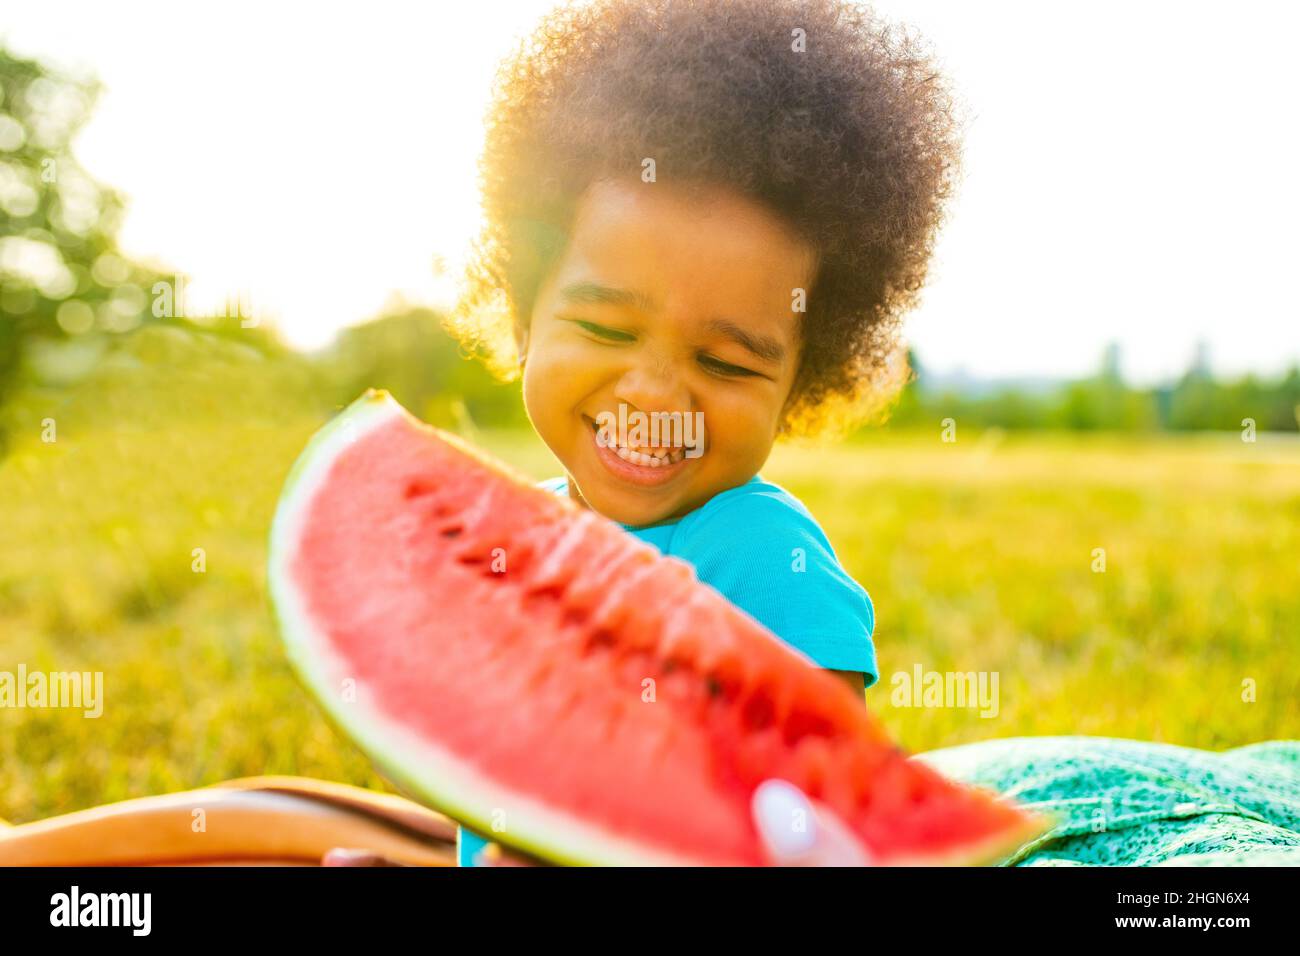 multicultural mexcan little curl with curls hair eating sweet red watermelon in park at picnic Stock Photo